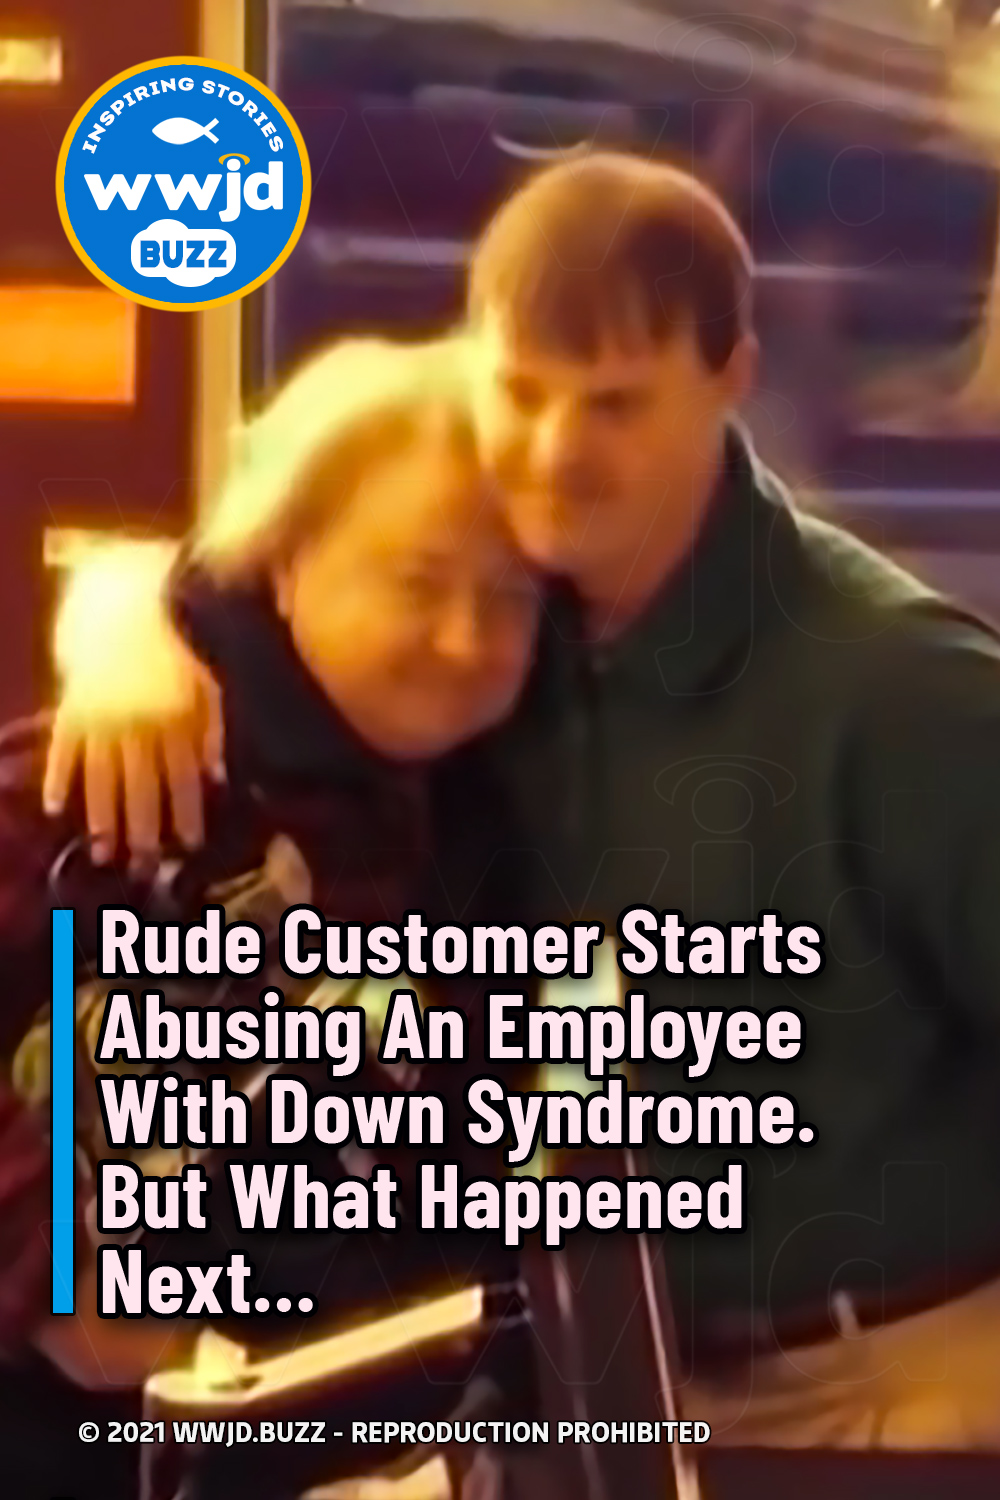 Rude Customer Starts Abusing An Employee With Down Syndrome. But What Happened Next...